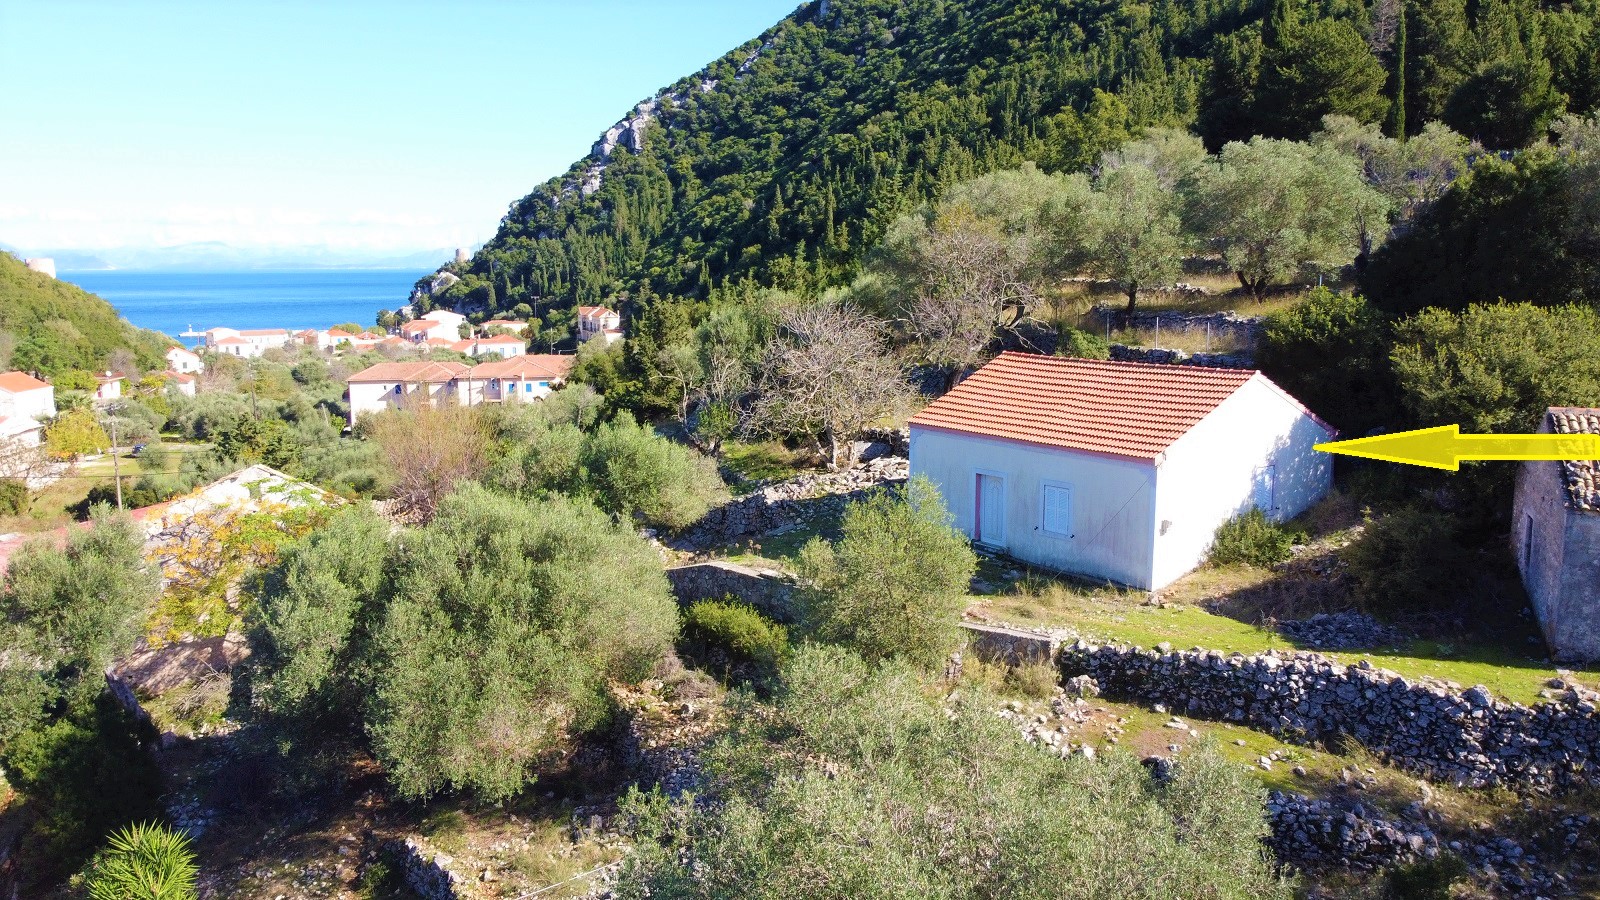 Aerial views and location of house and land for sale in Ithaca Greece Frikes